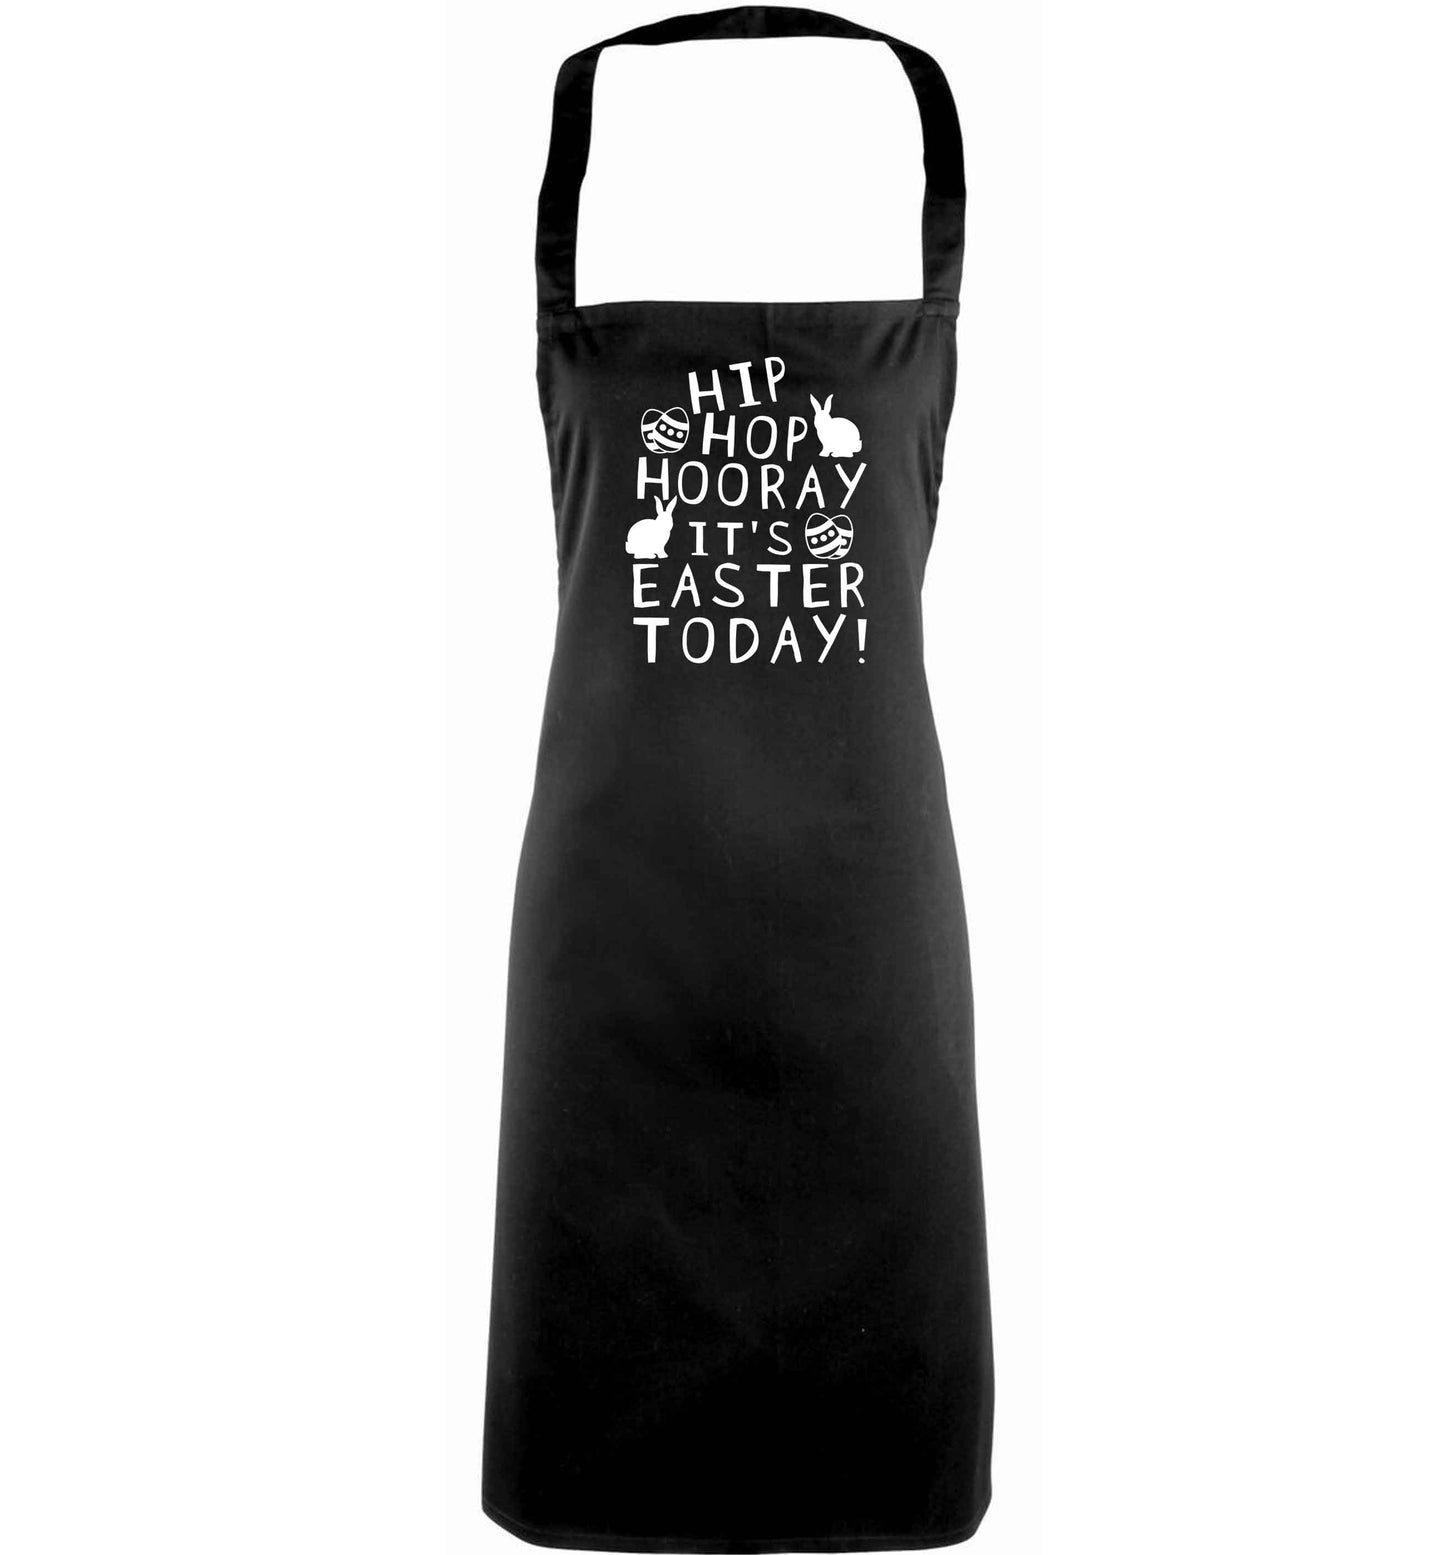 Hip hip hooray it's Easter today! adults black apron